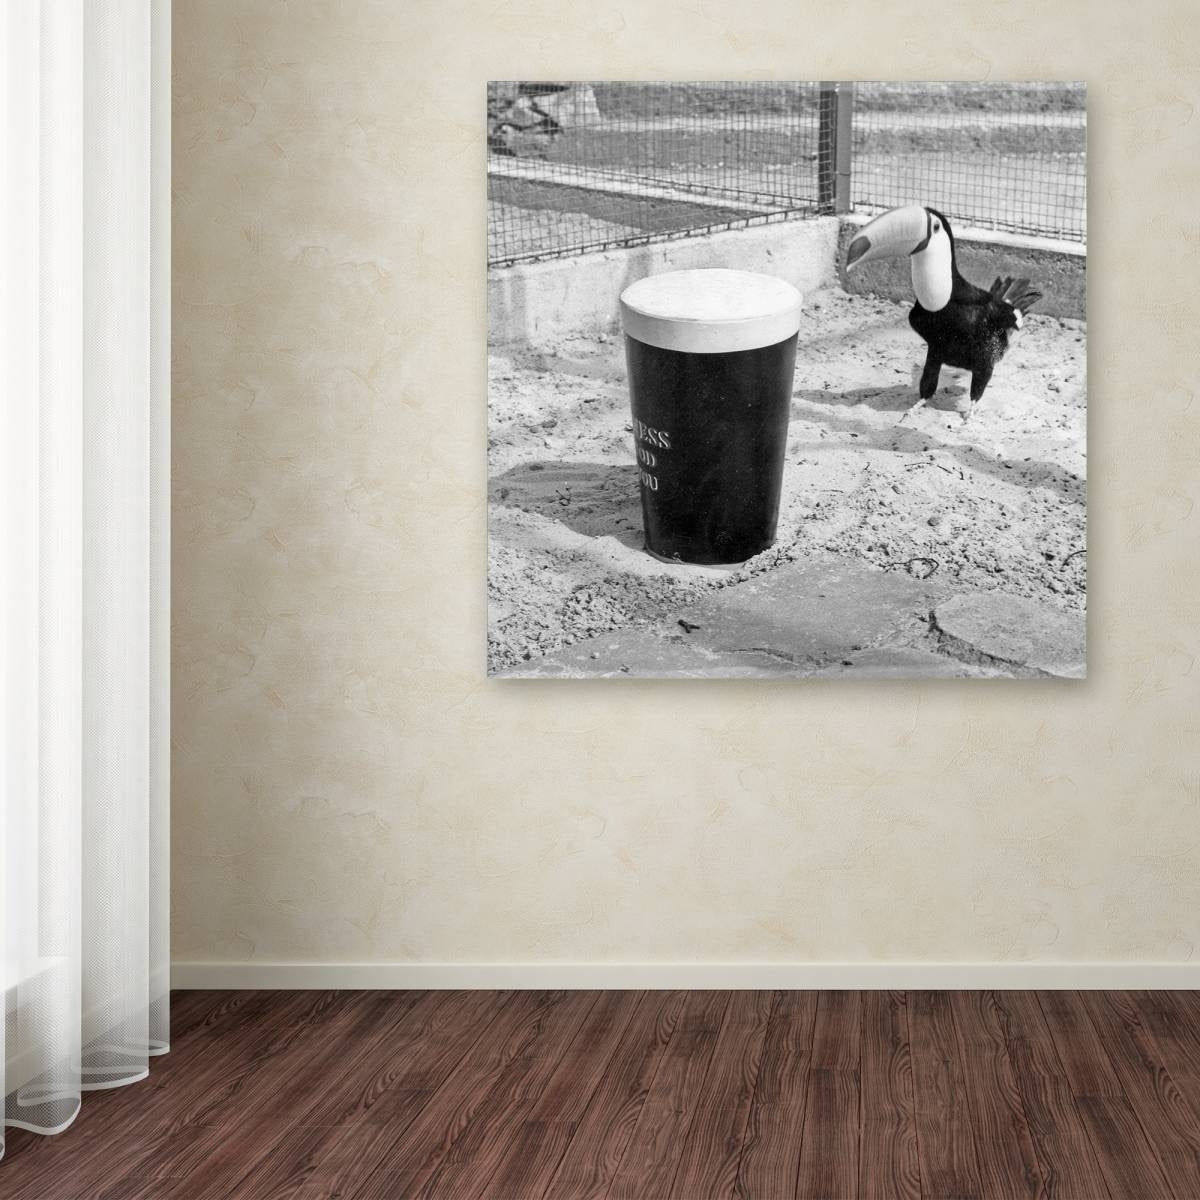 A vintage black and white photo of a Guinness Brewery 'Guinness XVII' Canvas Art guinea pig.